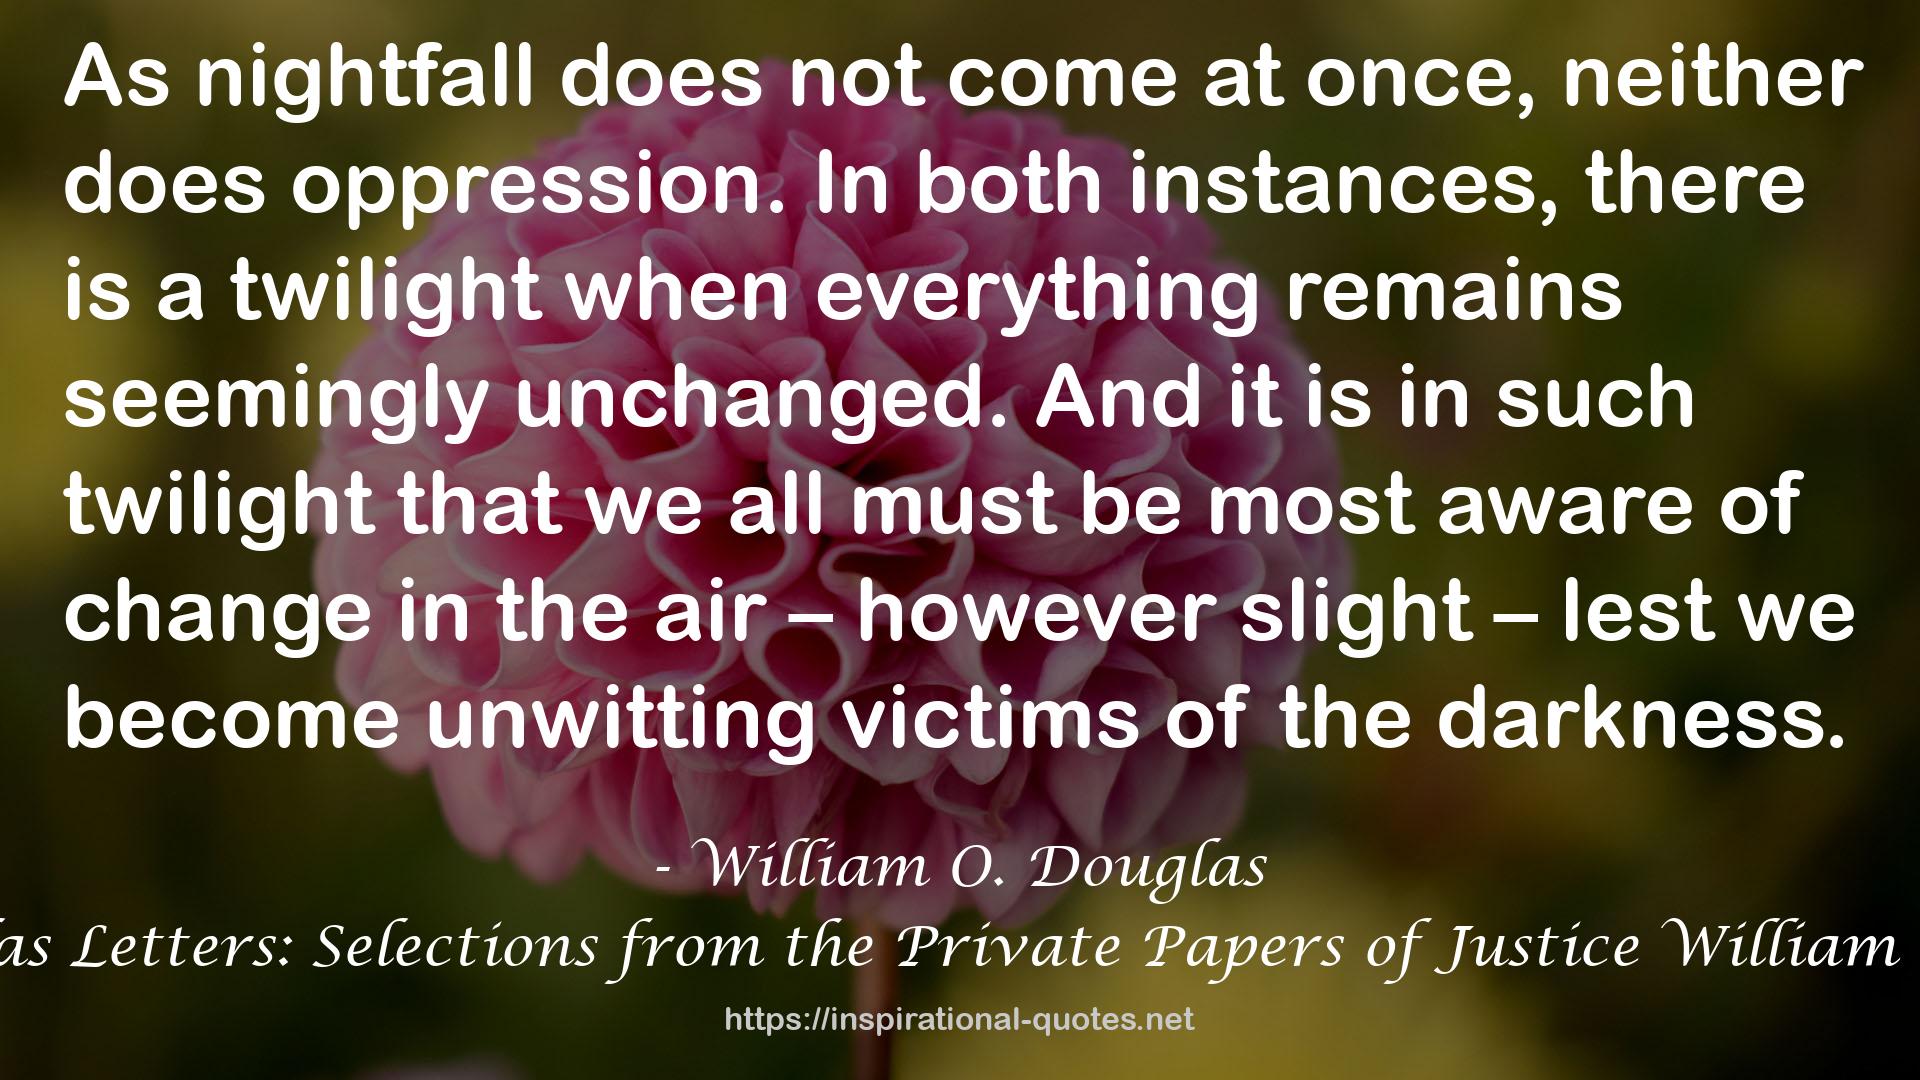 The Douglas Letters: Selections from the Private Papers of Justice William O. Douglas QUOTES